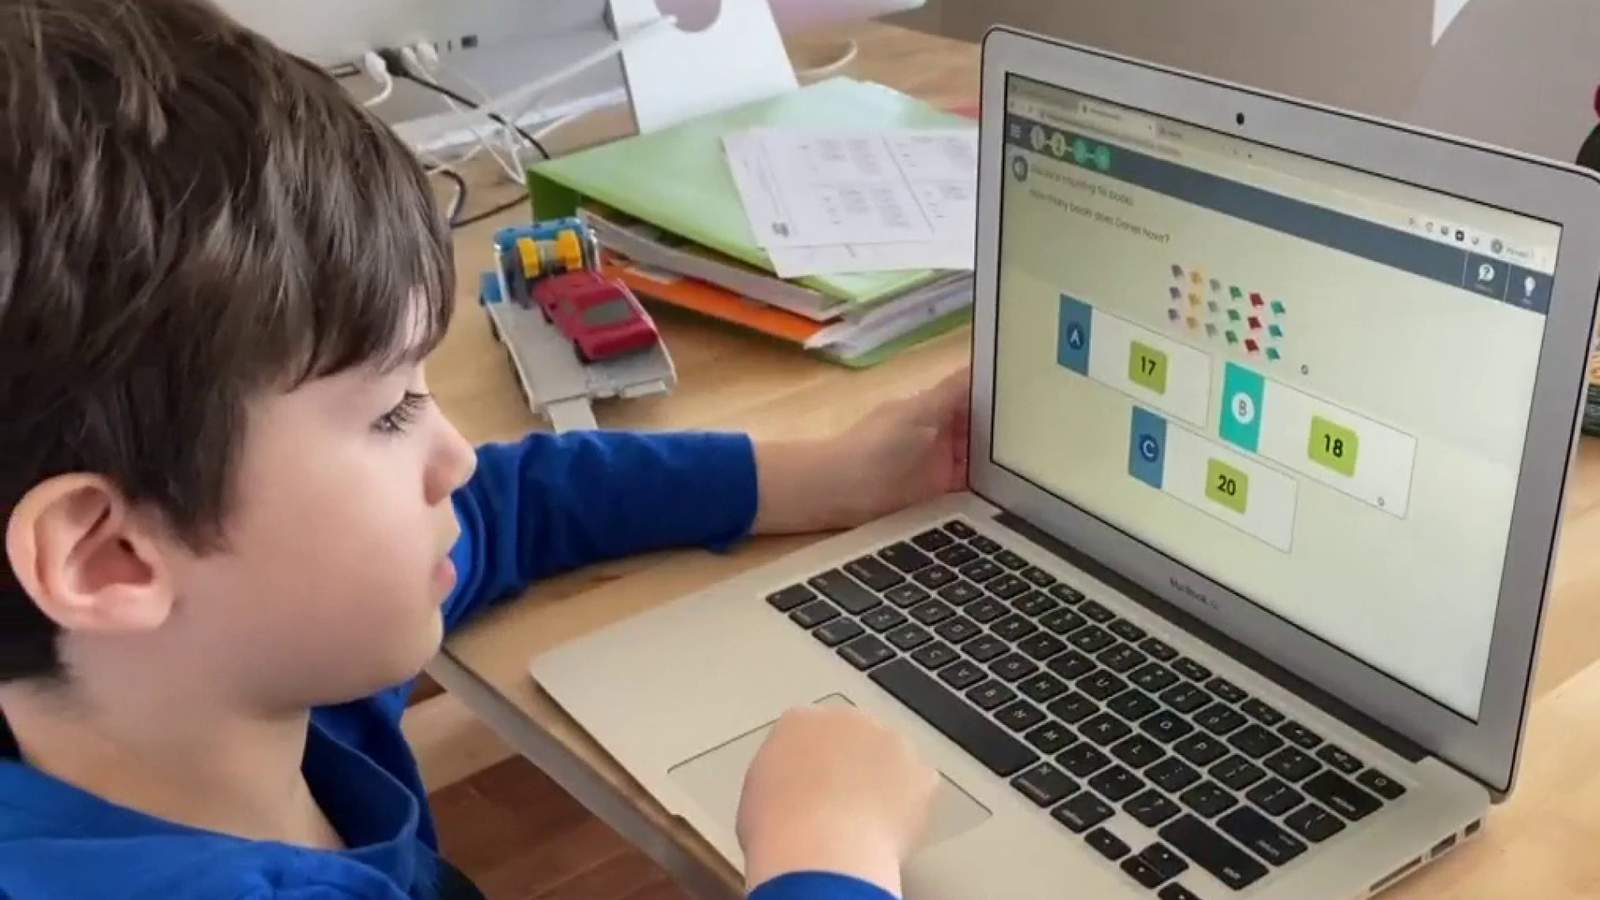 Parents, what products are you buying to set your kids up for virtual school?